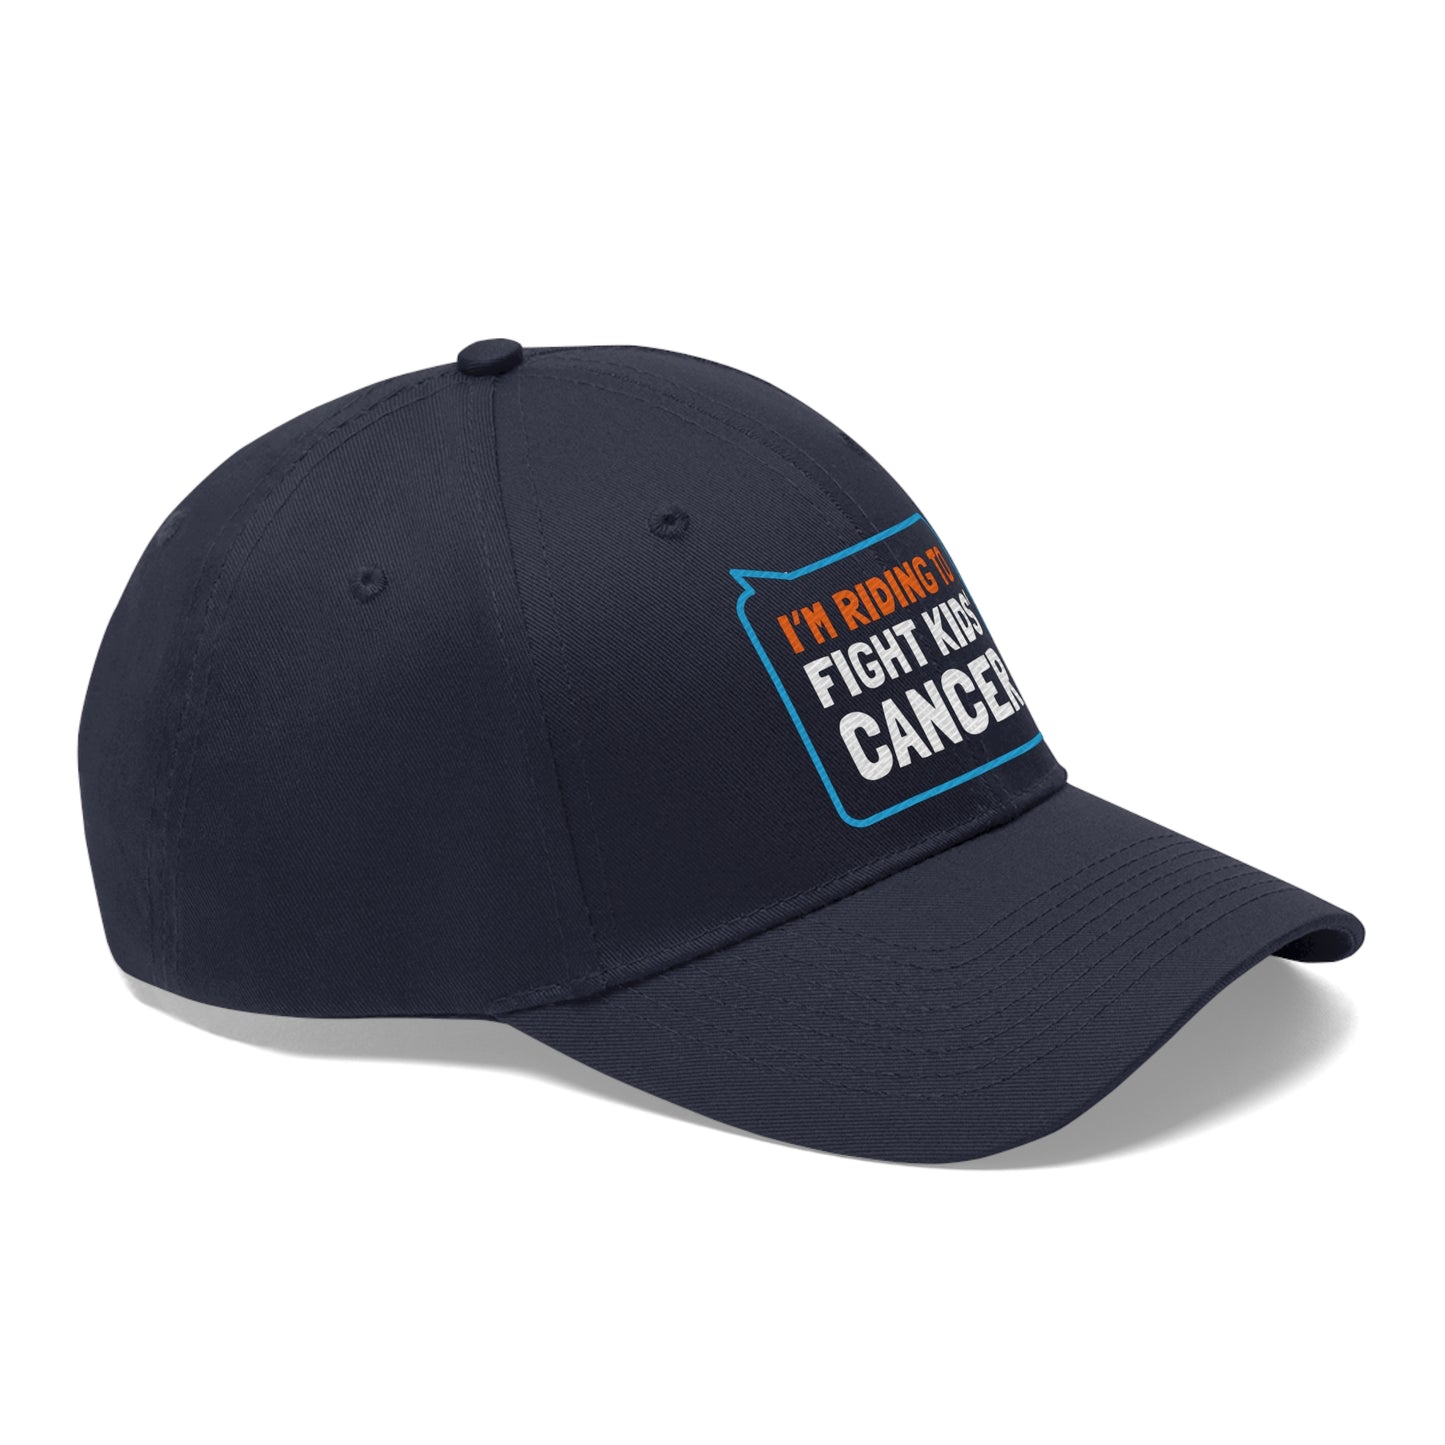 Unisex Twill Hat - I'm Riding to Fight Kids' Cancer!